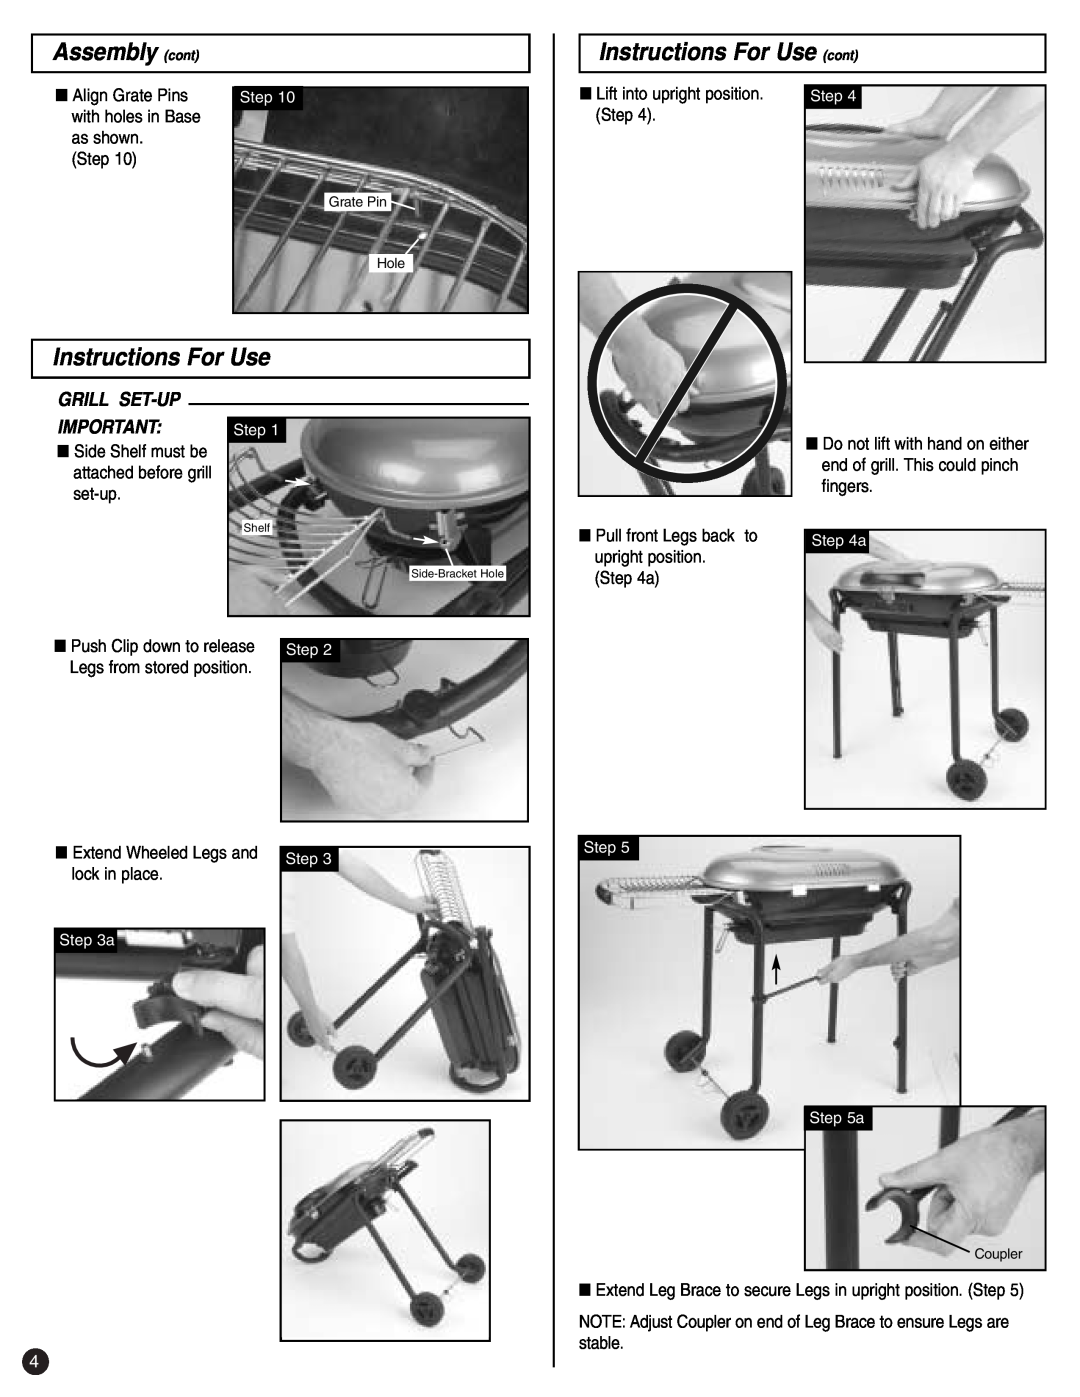 Coleman p9945-700 Instructions For Use cont, Grill Set-Up, Assembly cont, Extend Wheeled Legs and, lock in place 